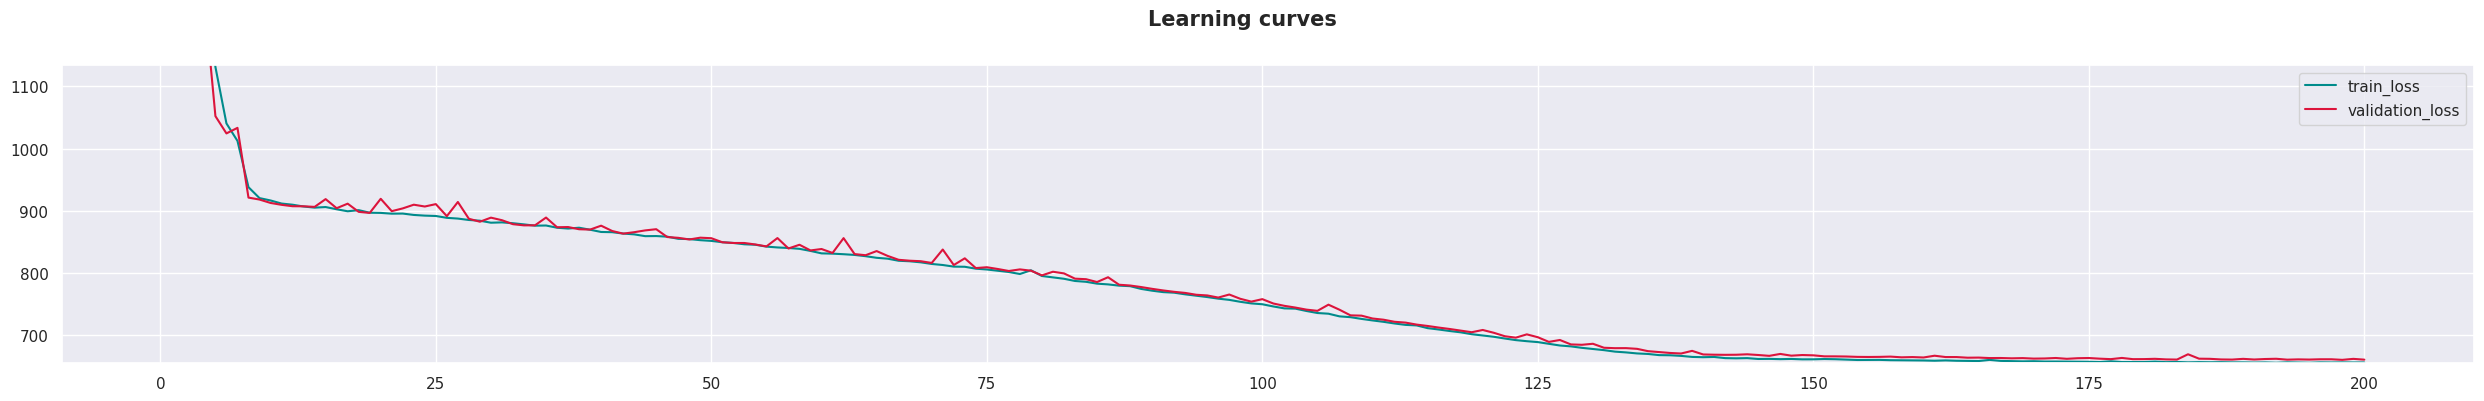 Learning_curves.png